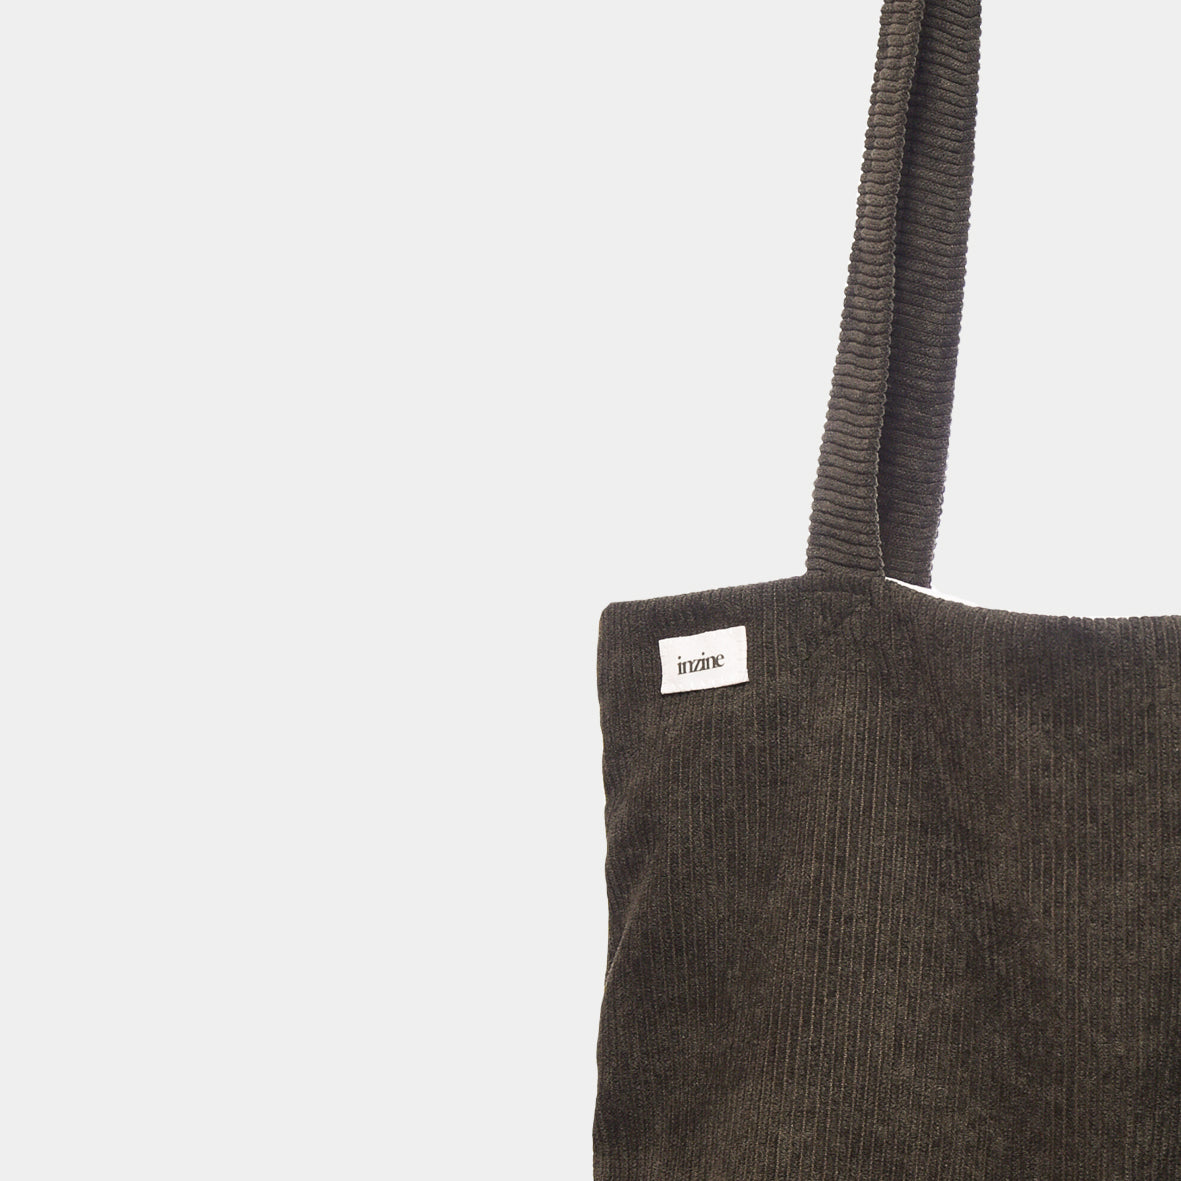 Corduroy tote bag, forest green colour with green inzine label. Hand made in New Zealand.